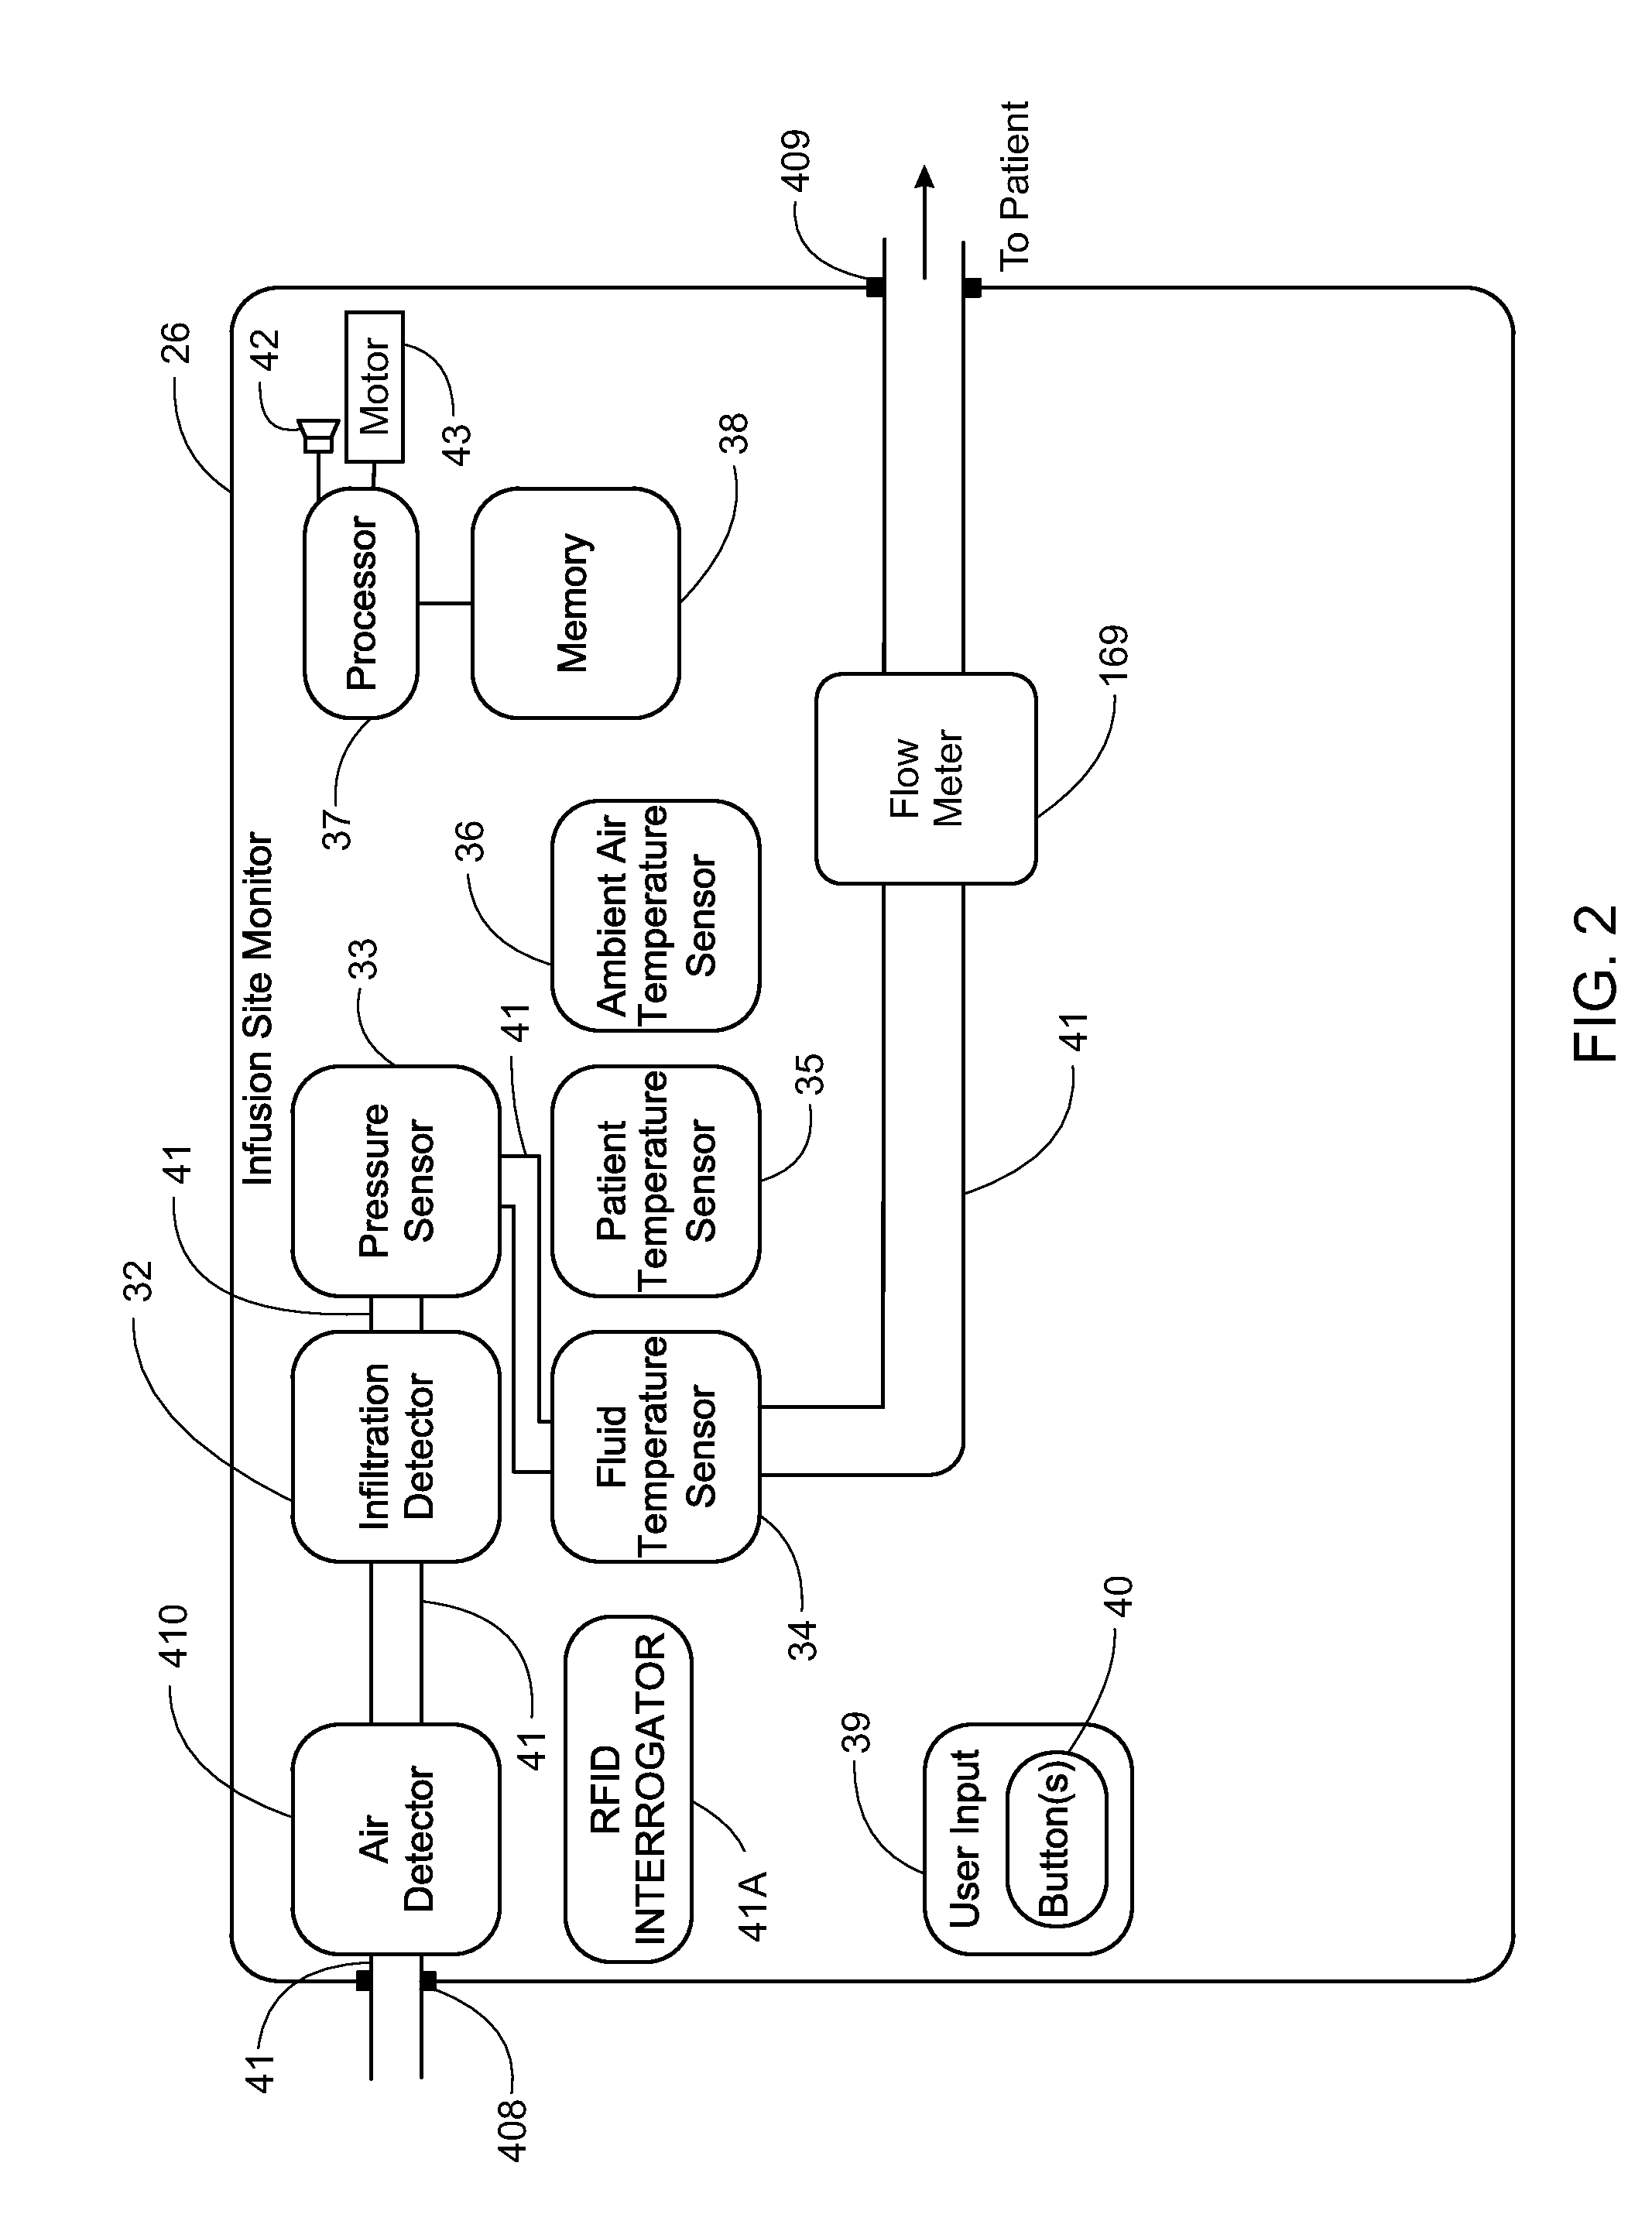 Apparatus for Infusing Fluid